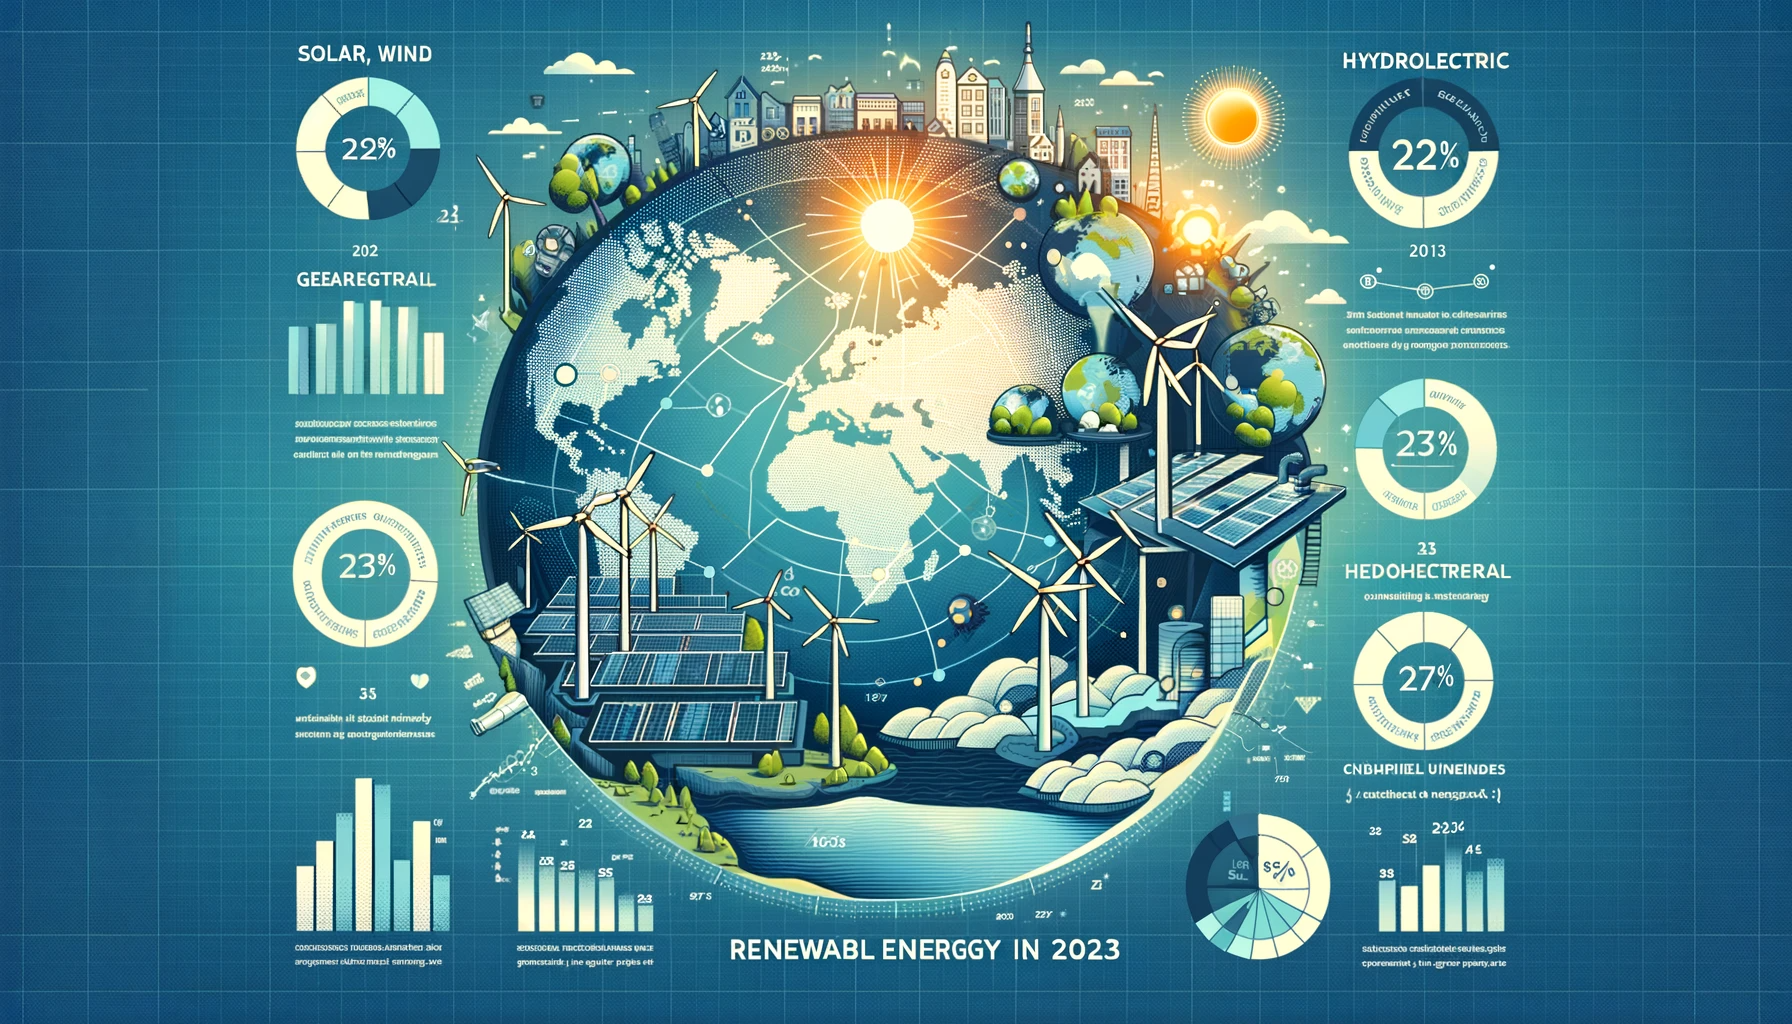 Global Energy Landscape 2023: An Analysis of Energy Structures and Consumption Ratios